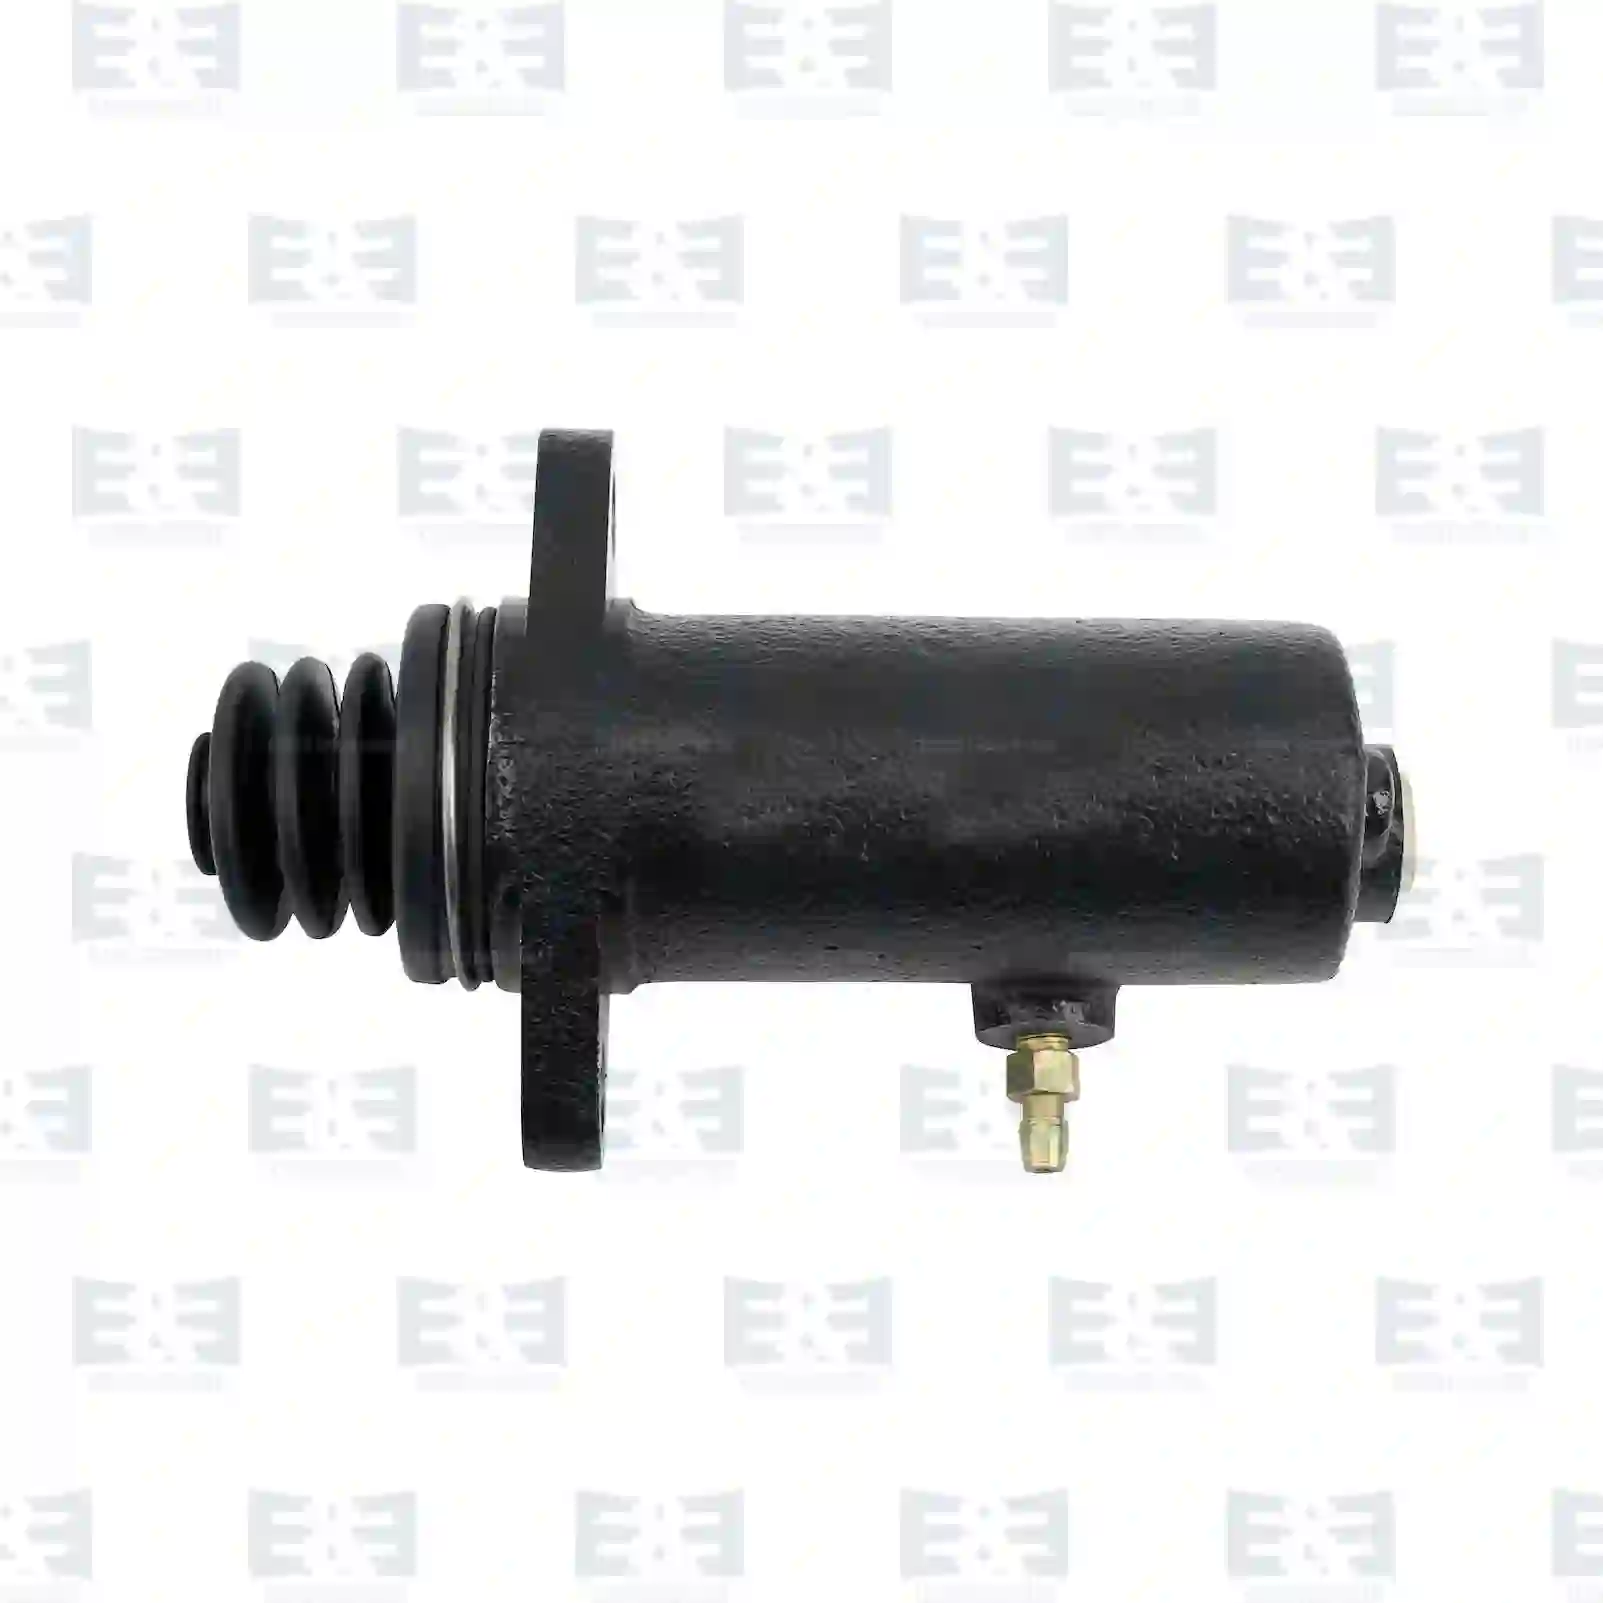 Clutch Cylinder Clutch cylinder, EE No 2E2289237 ,  oem no:0002957907, 0002958107, 0012950307, 0012955307, 0012958807, 0012959407, 0022950407, ZG30263-0008 E&E Truck Spare Parts | Truck Spare Parts, Auotomotive Spare Parts